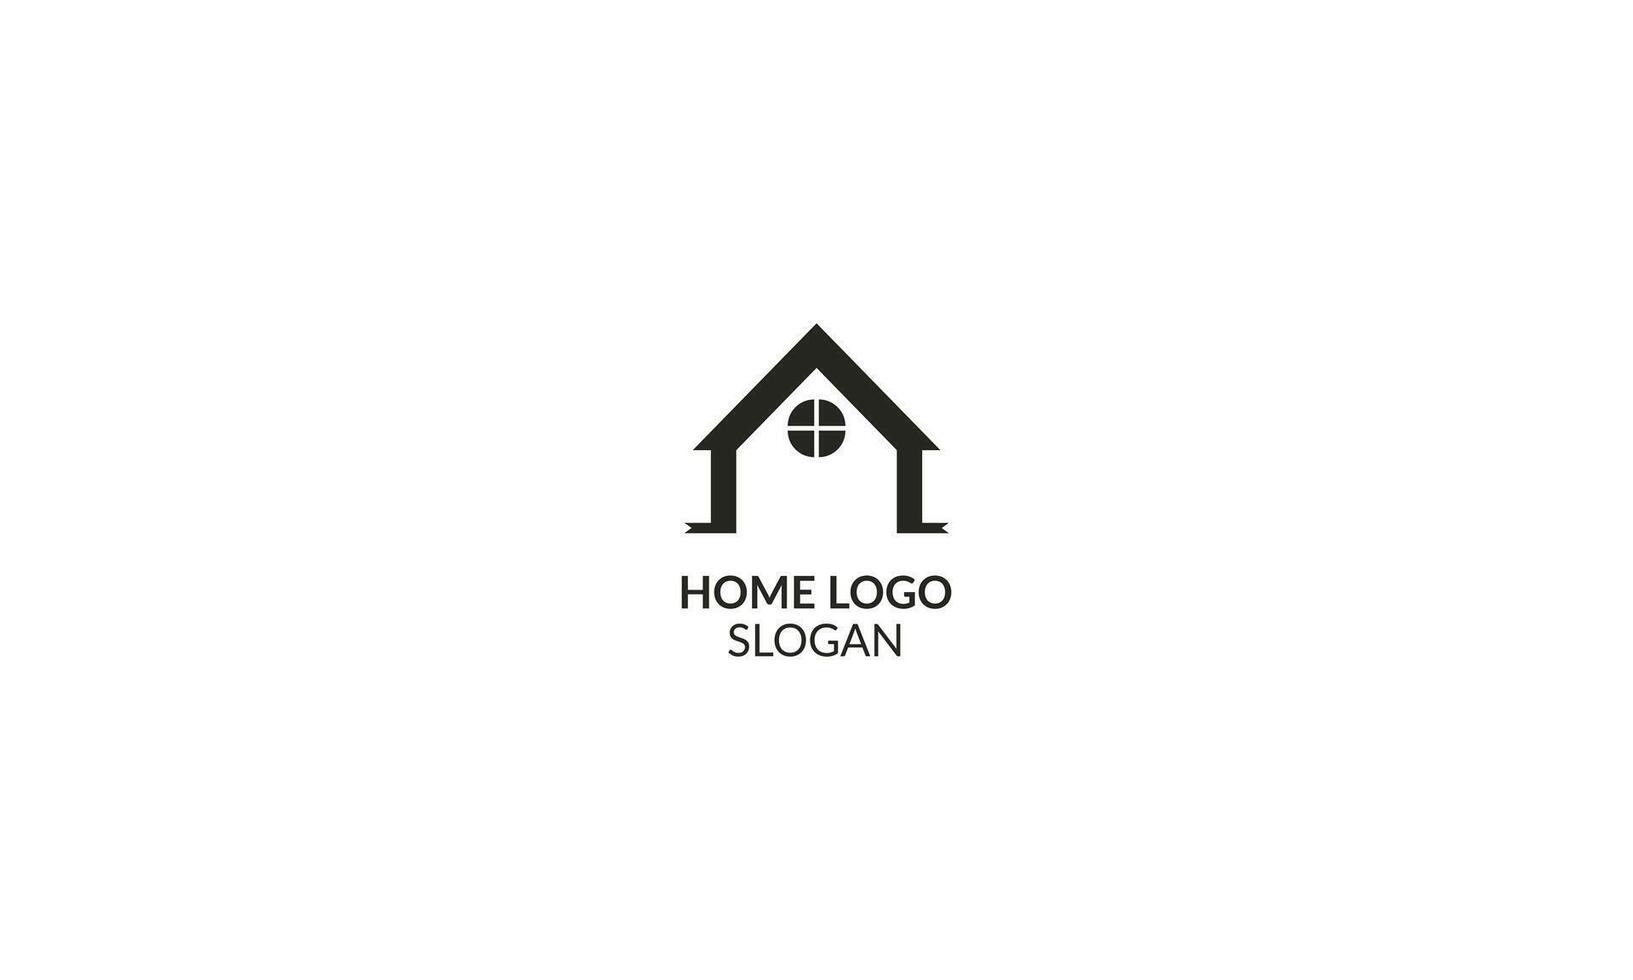 A visual representation of the sanctuary we offer, our home logo is a place of comfort and warmth. vector